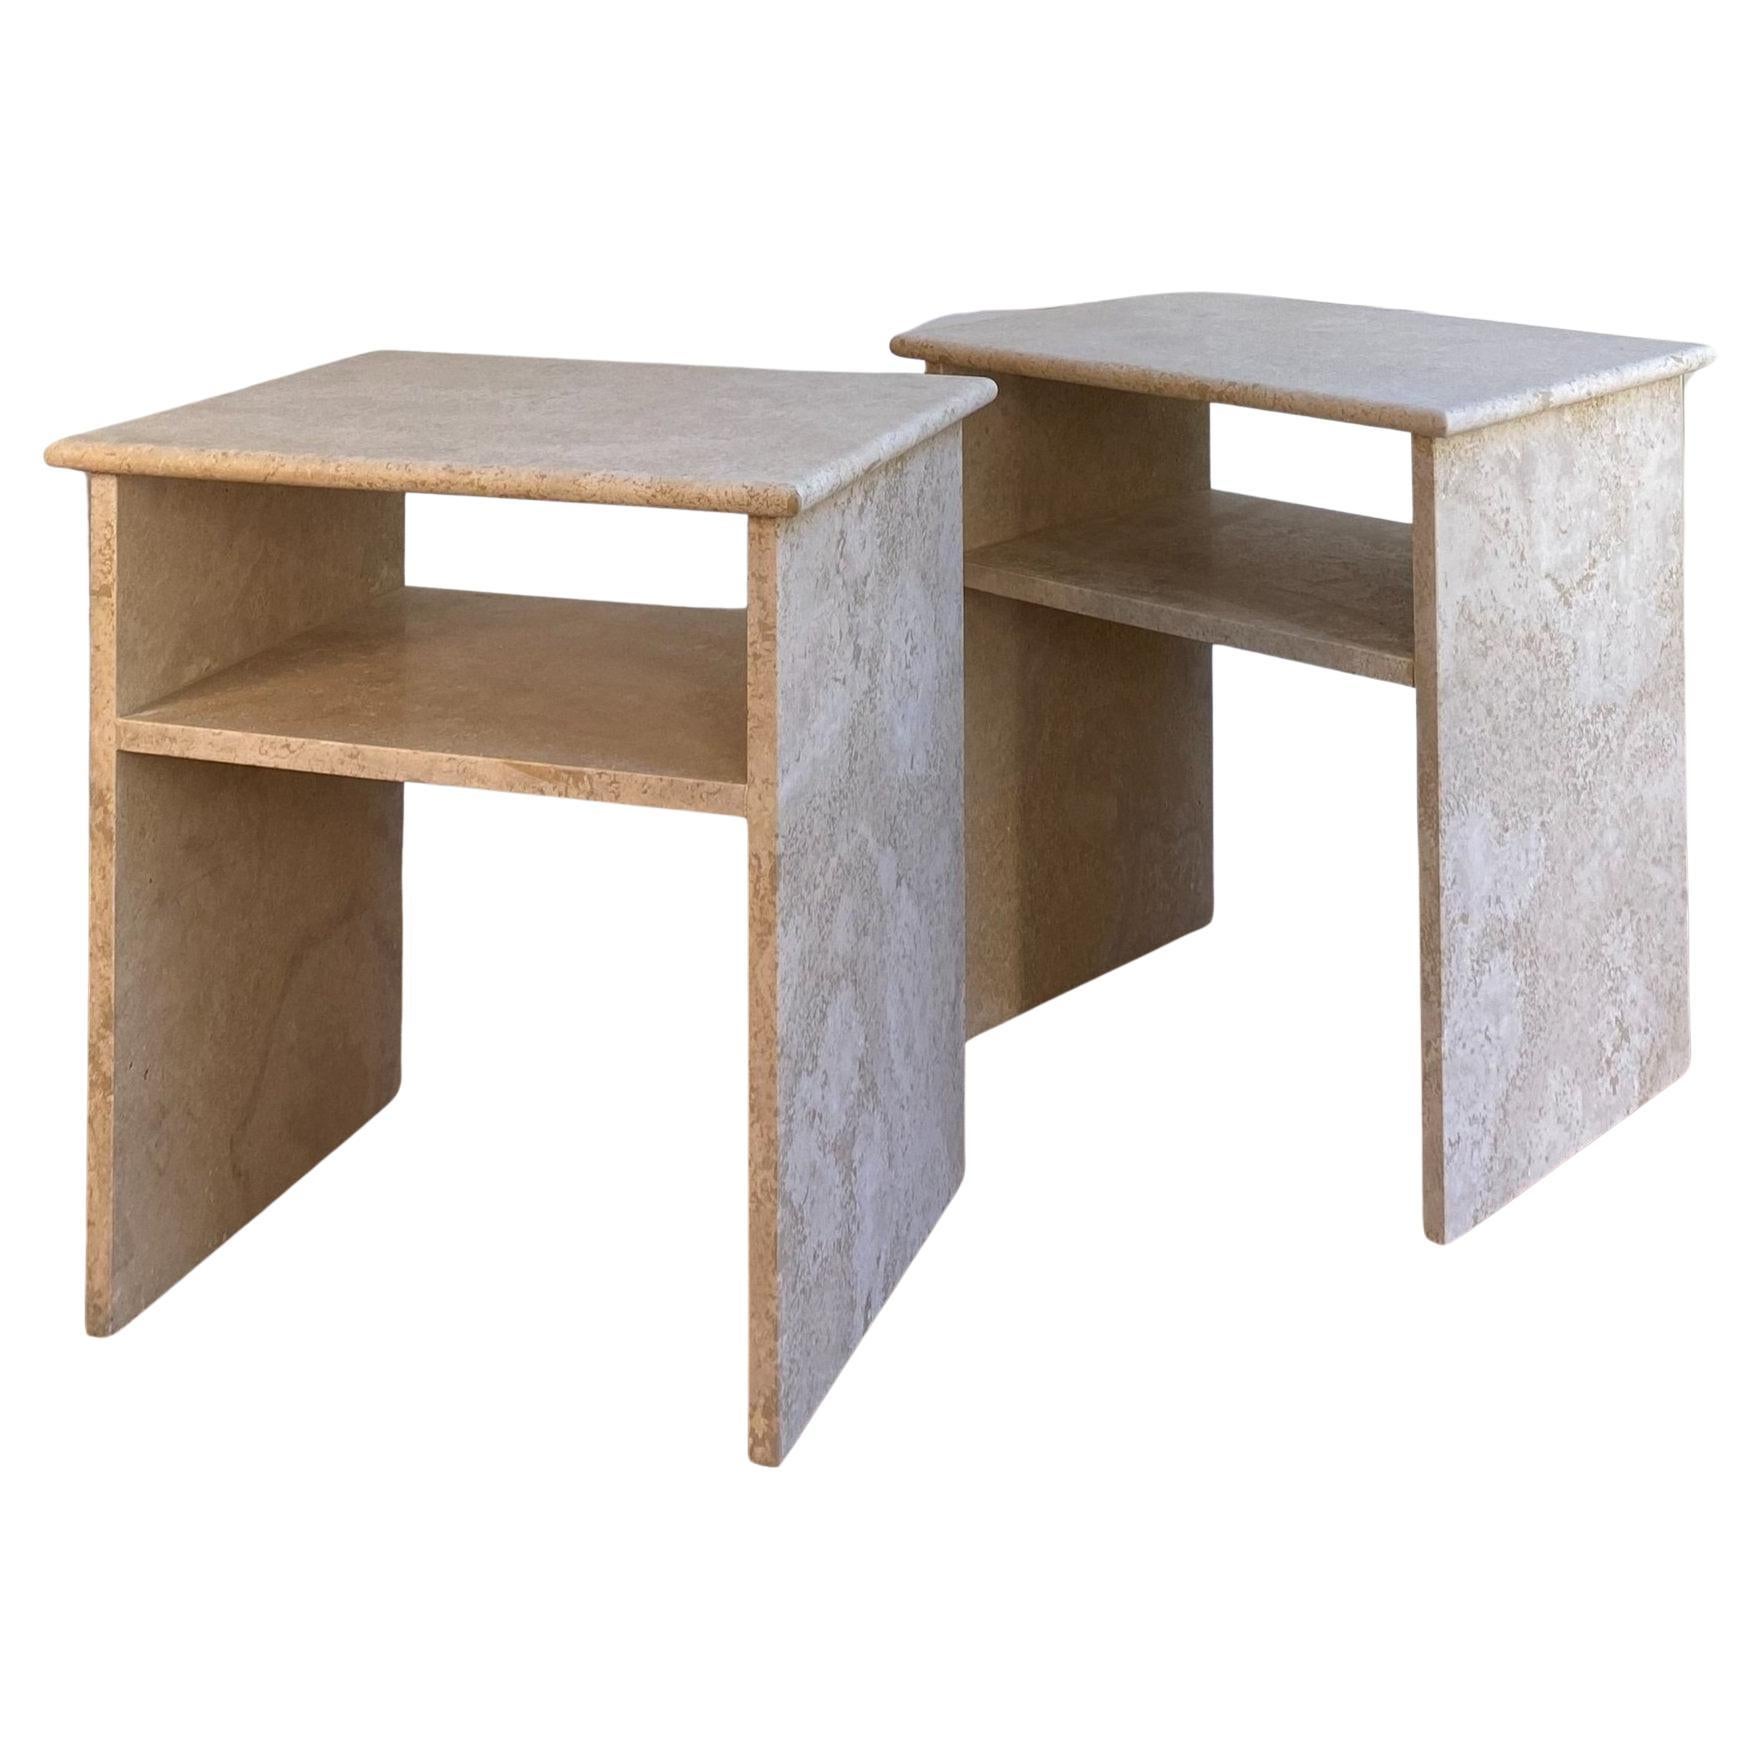 Set  Of 2 Travertino Al Verso Bedside Tables by ALMARMO For Sale